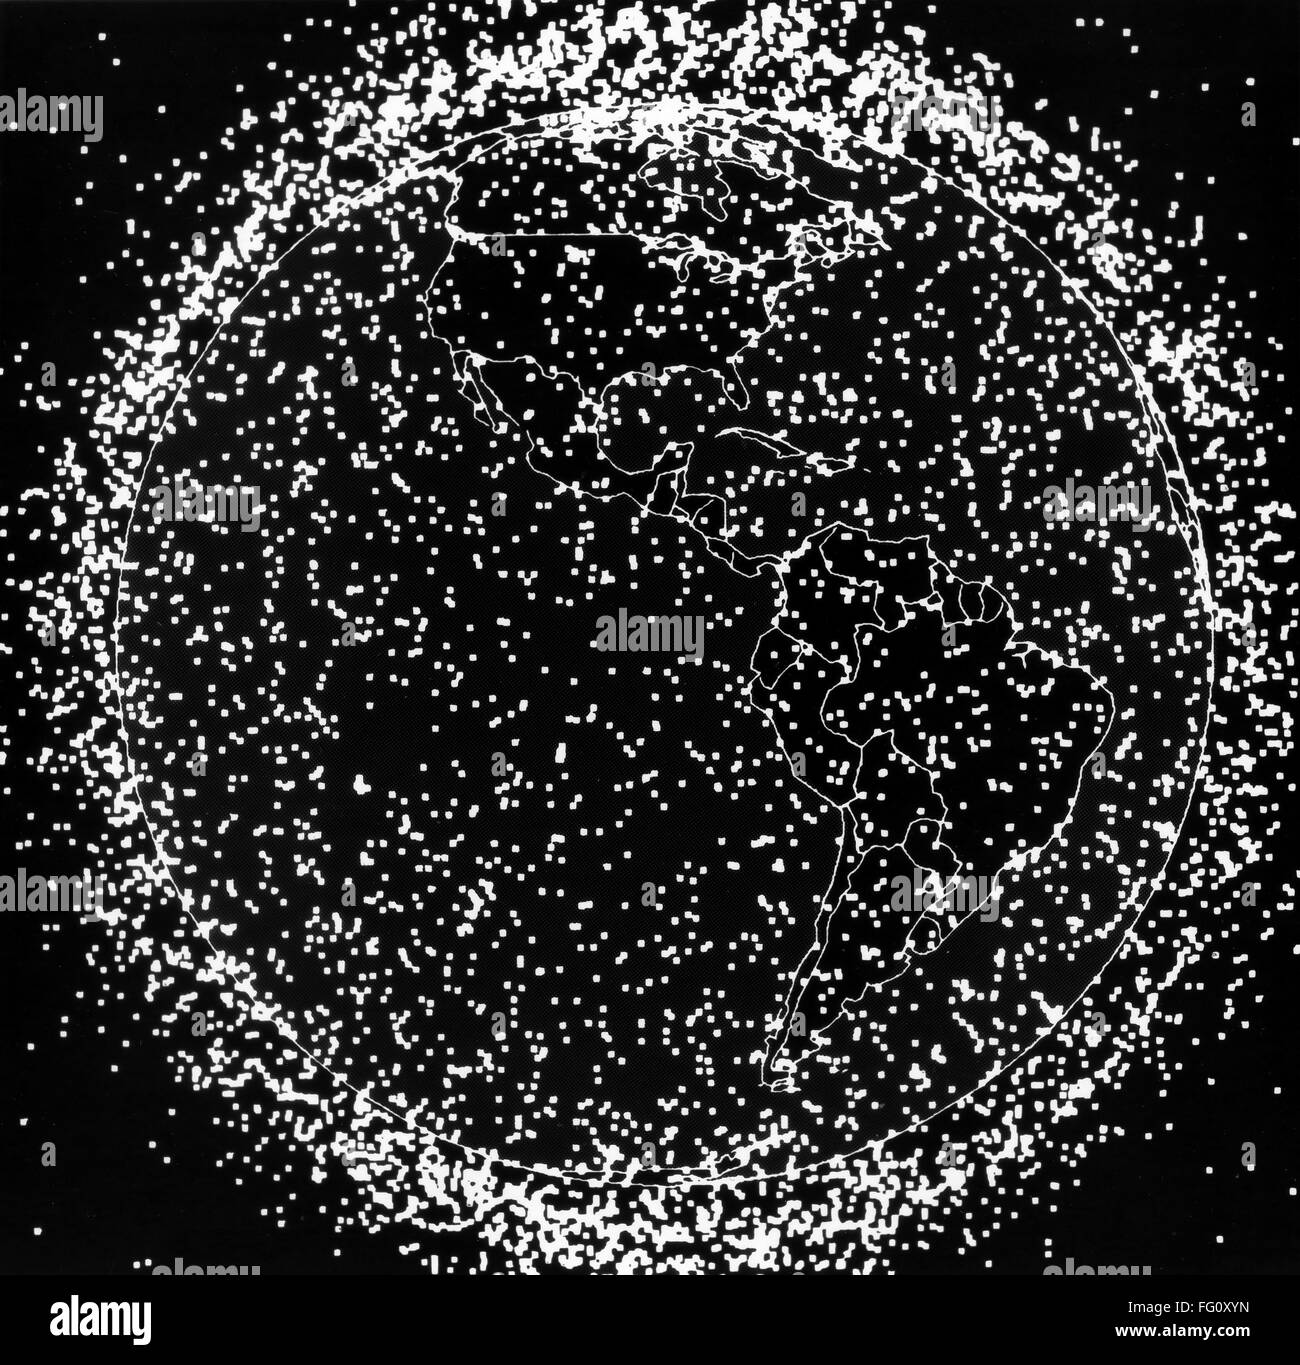 SPACE: ORBIT DEBRIS, 1987. /nComputer graphic showing the locations of thousands of satellites, spent rocket stages and breakup debris in low Earth-orbit. Produced from data collected in 1987. Stock Photo